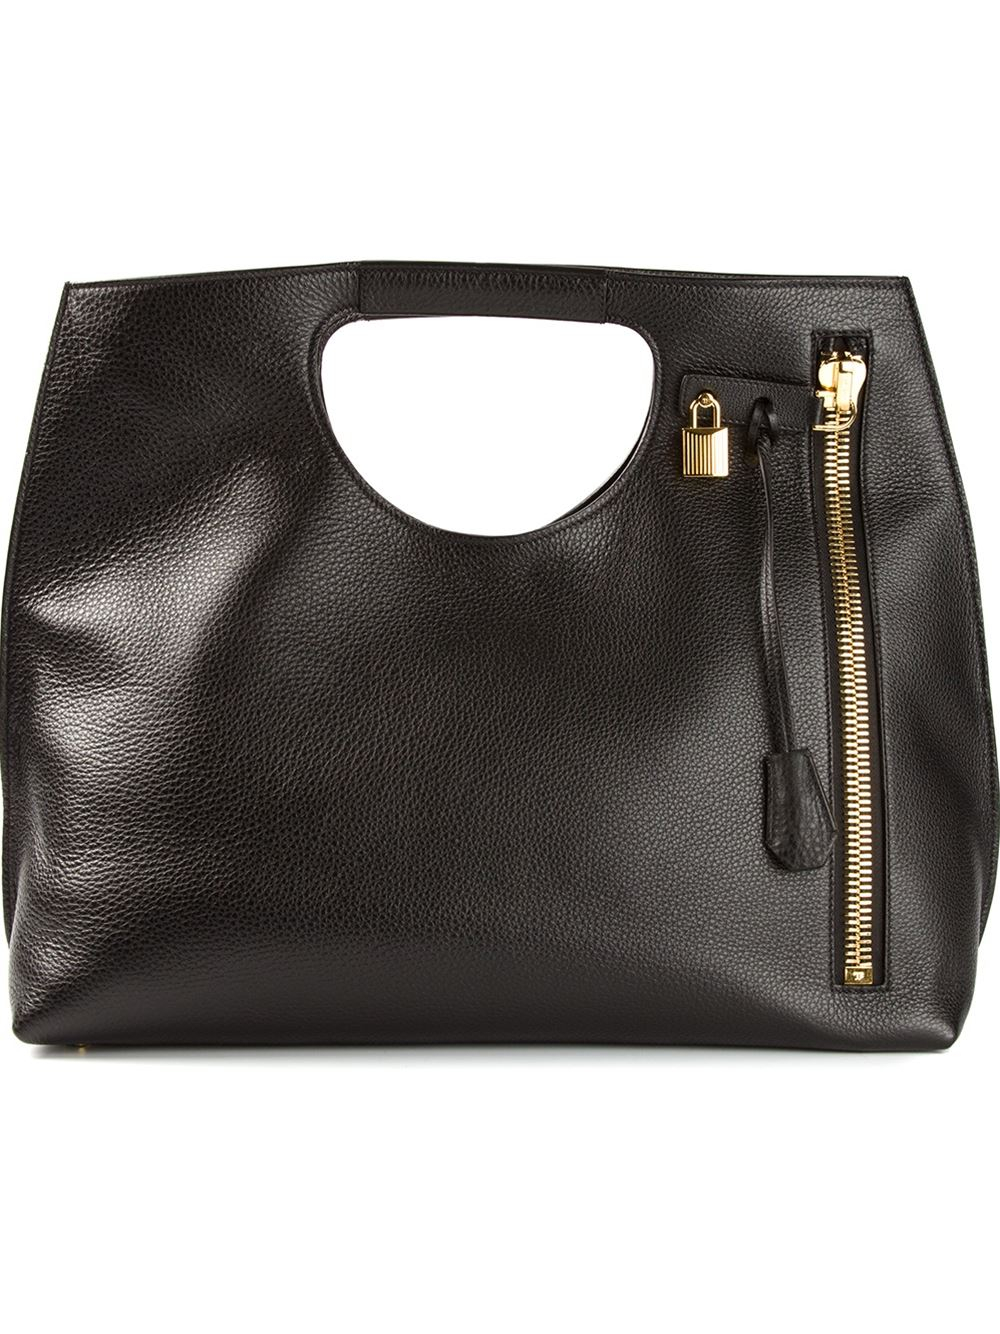 Tom Ford Alix Tote in Black | Lyst